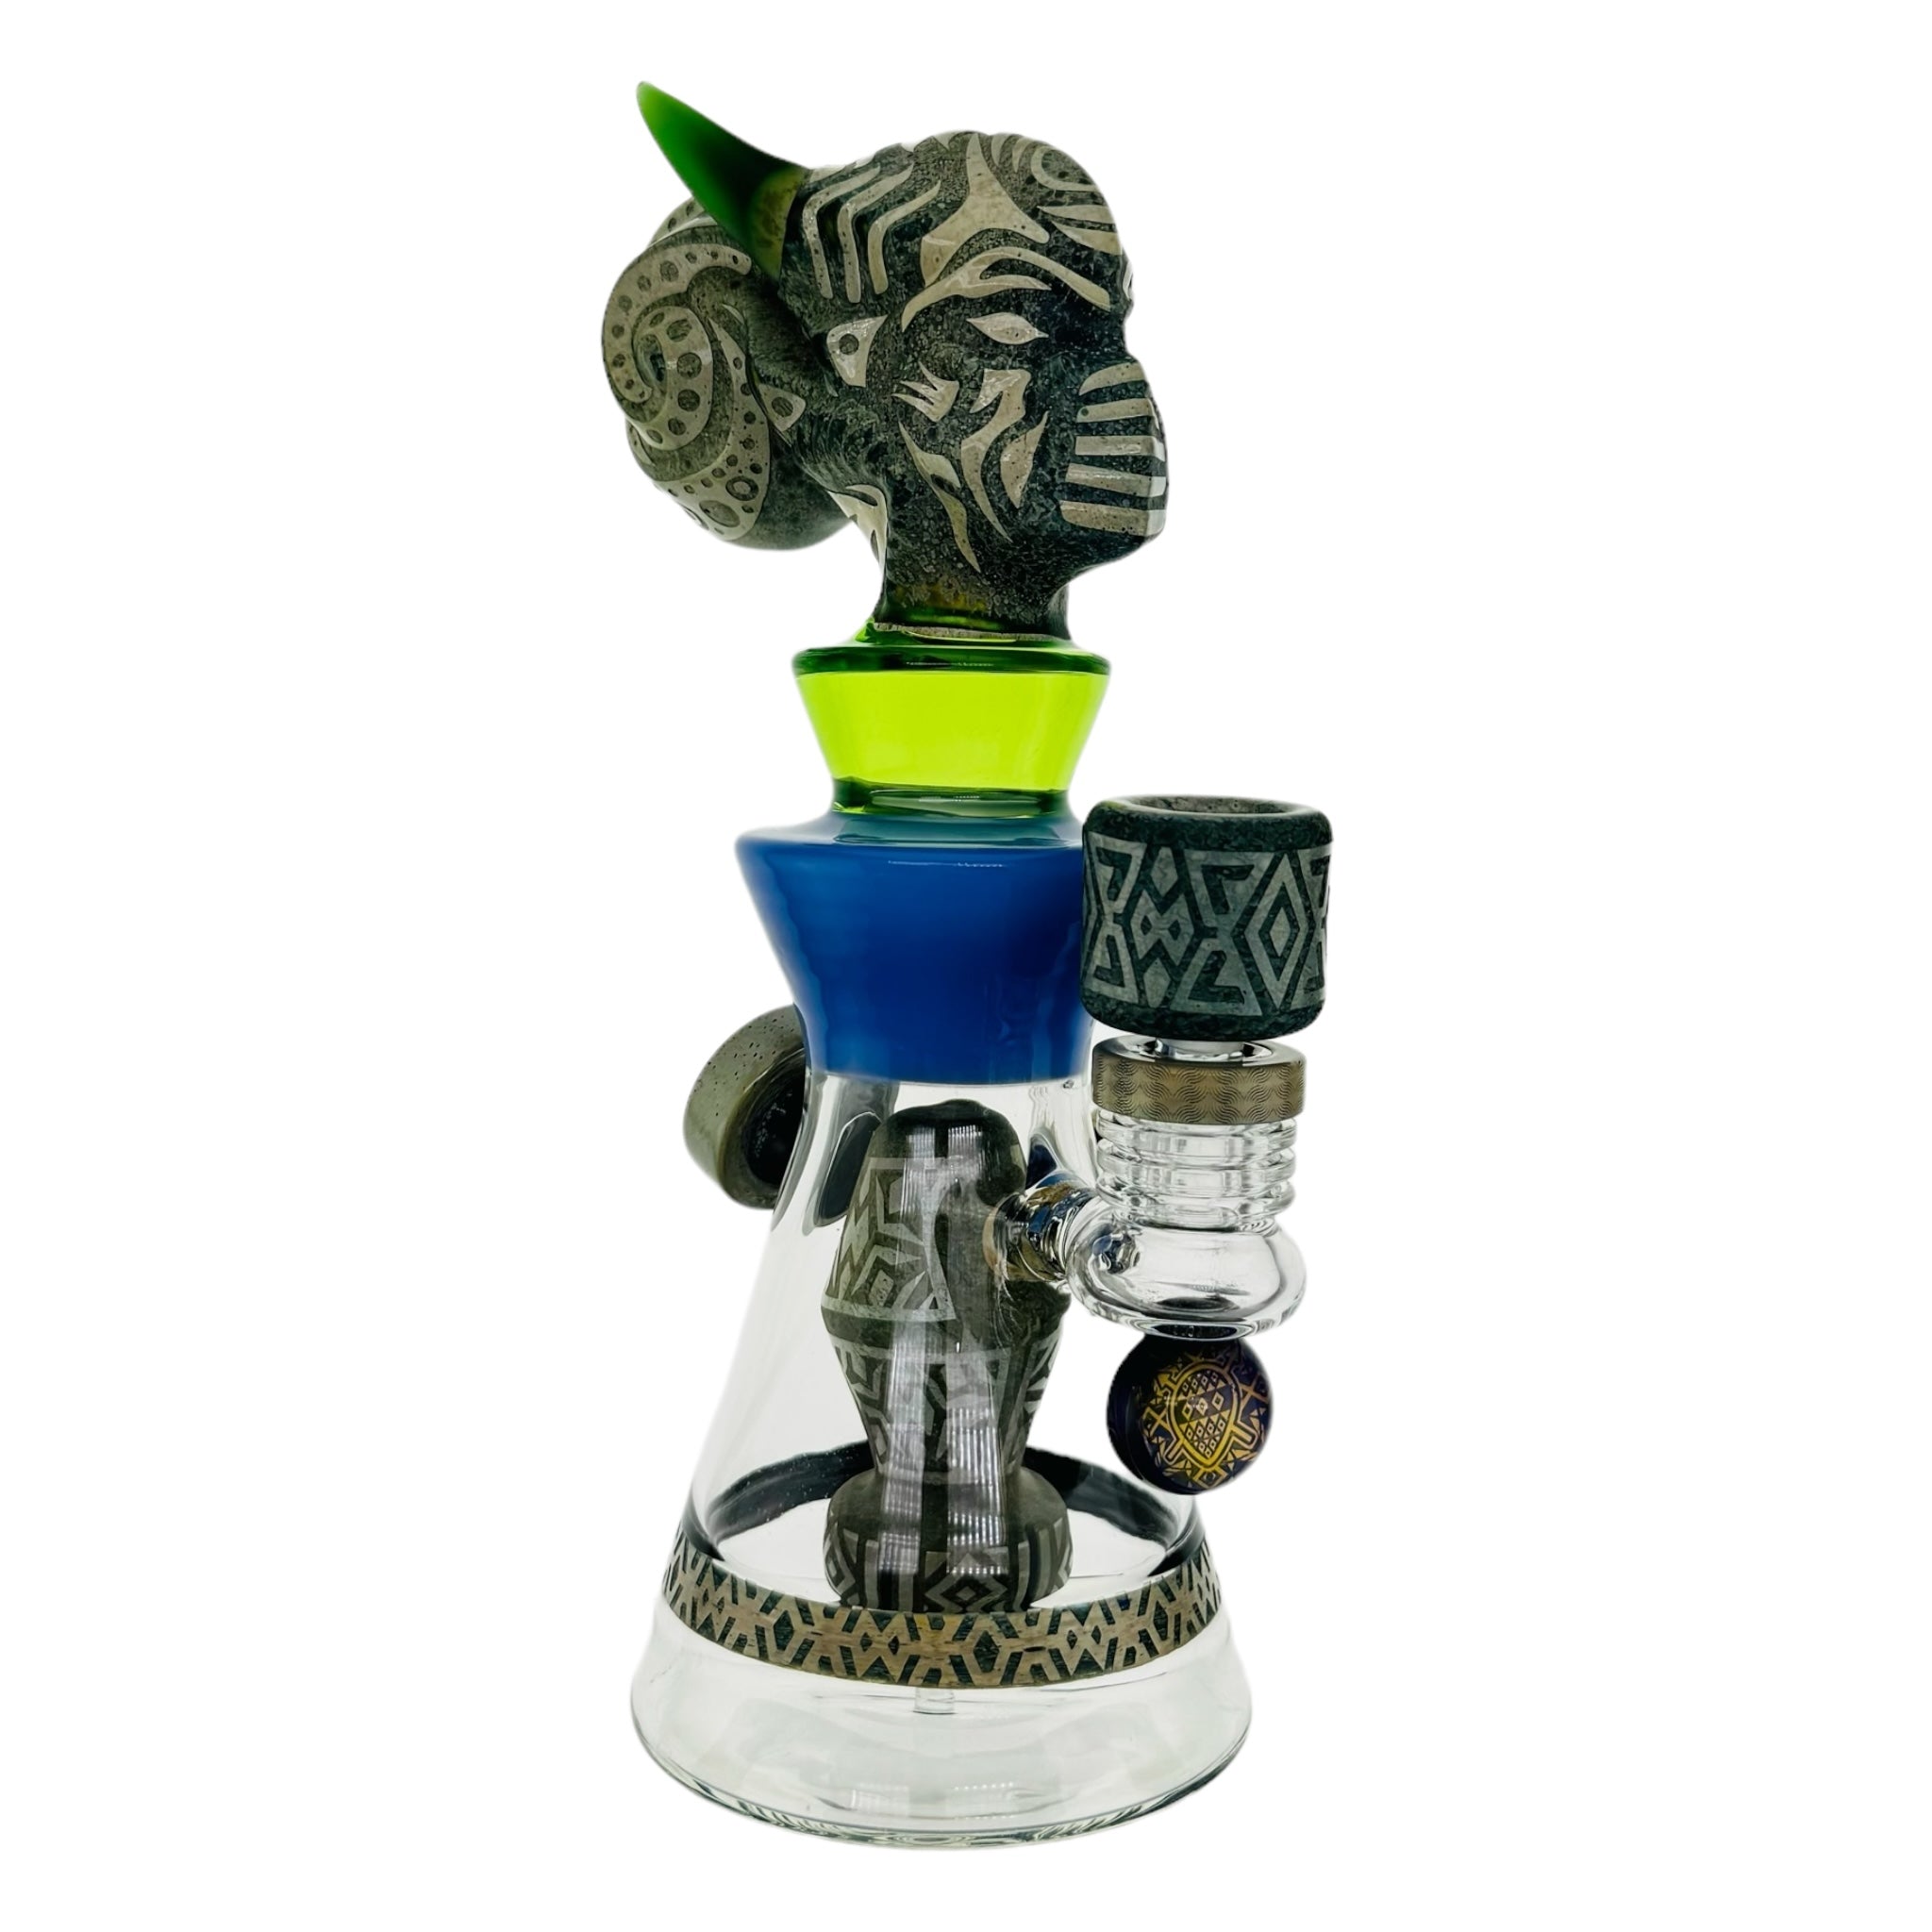 10 Inch Sandblasted Horned Creature Water Pipe Bong